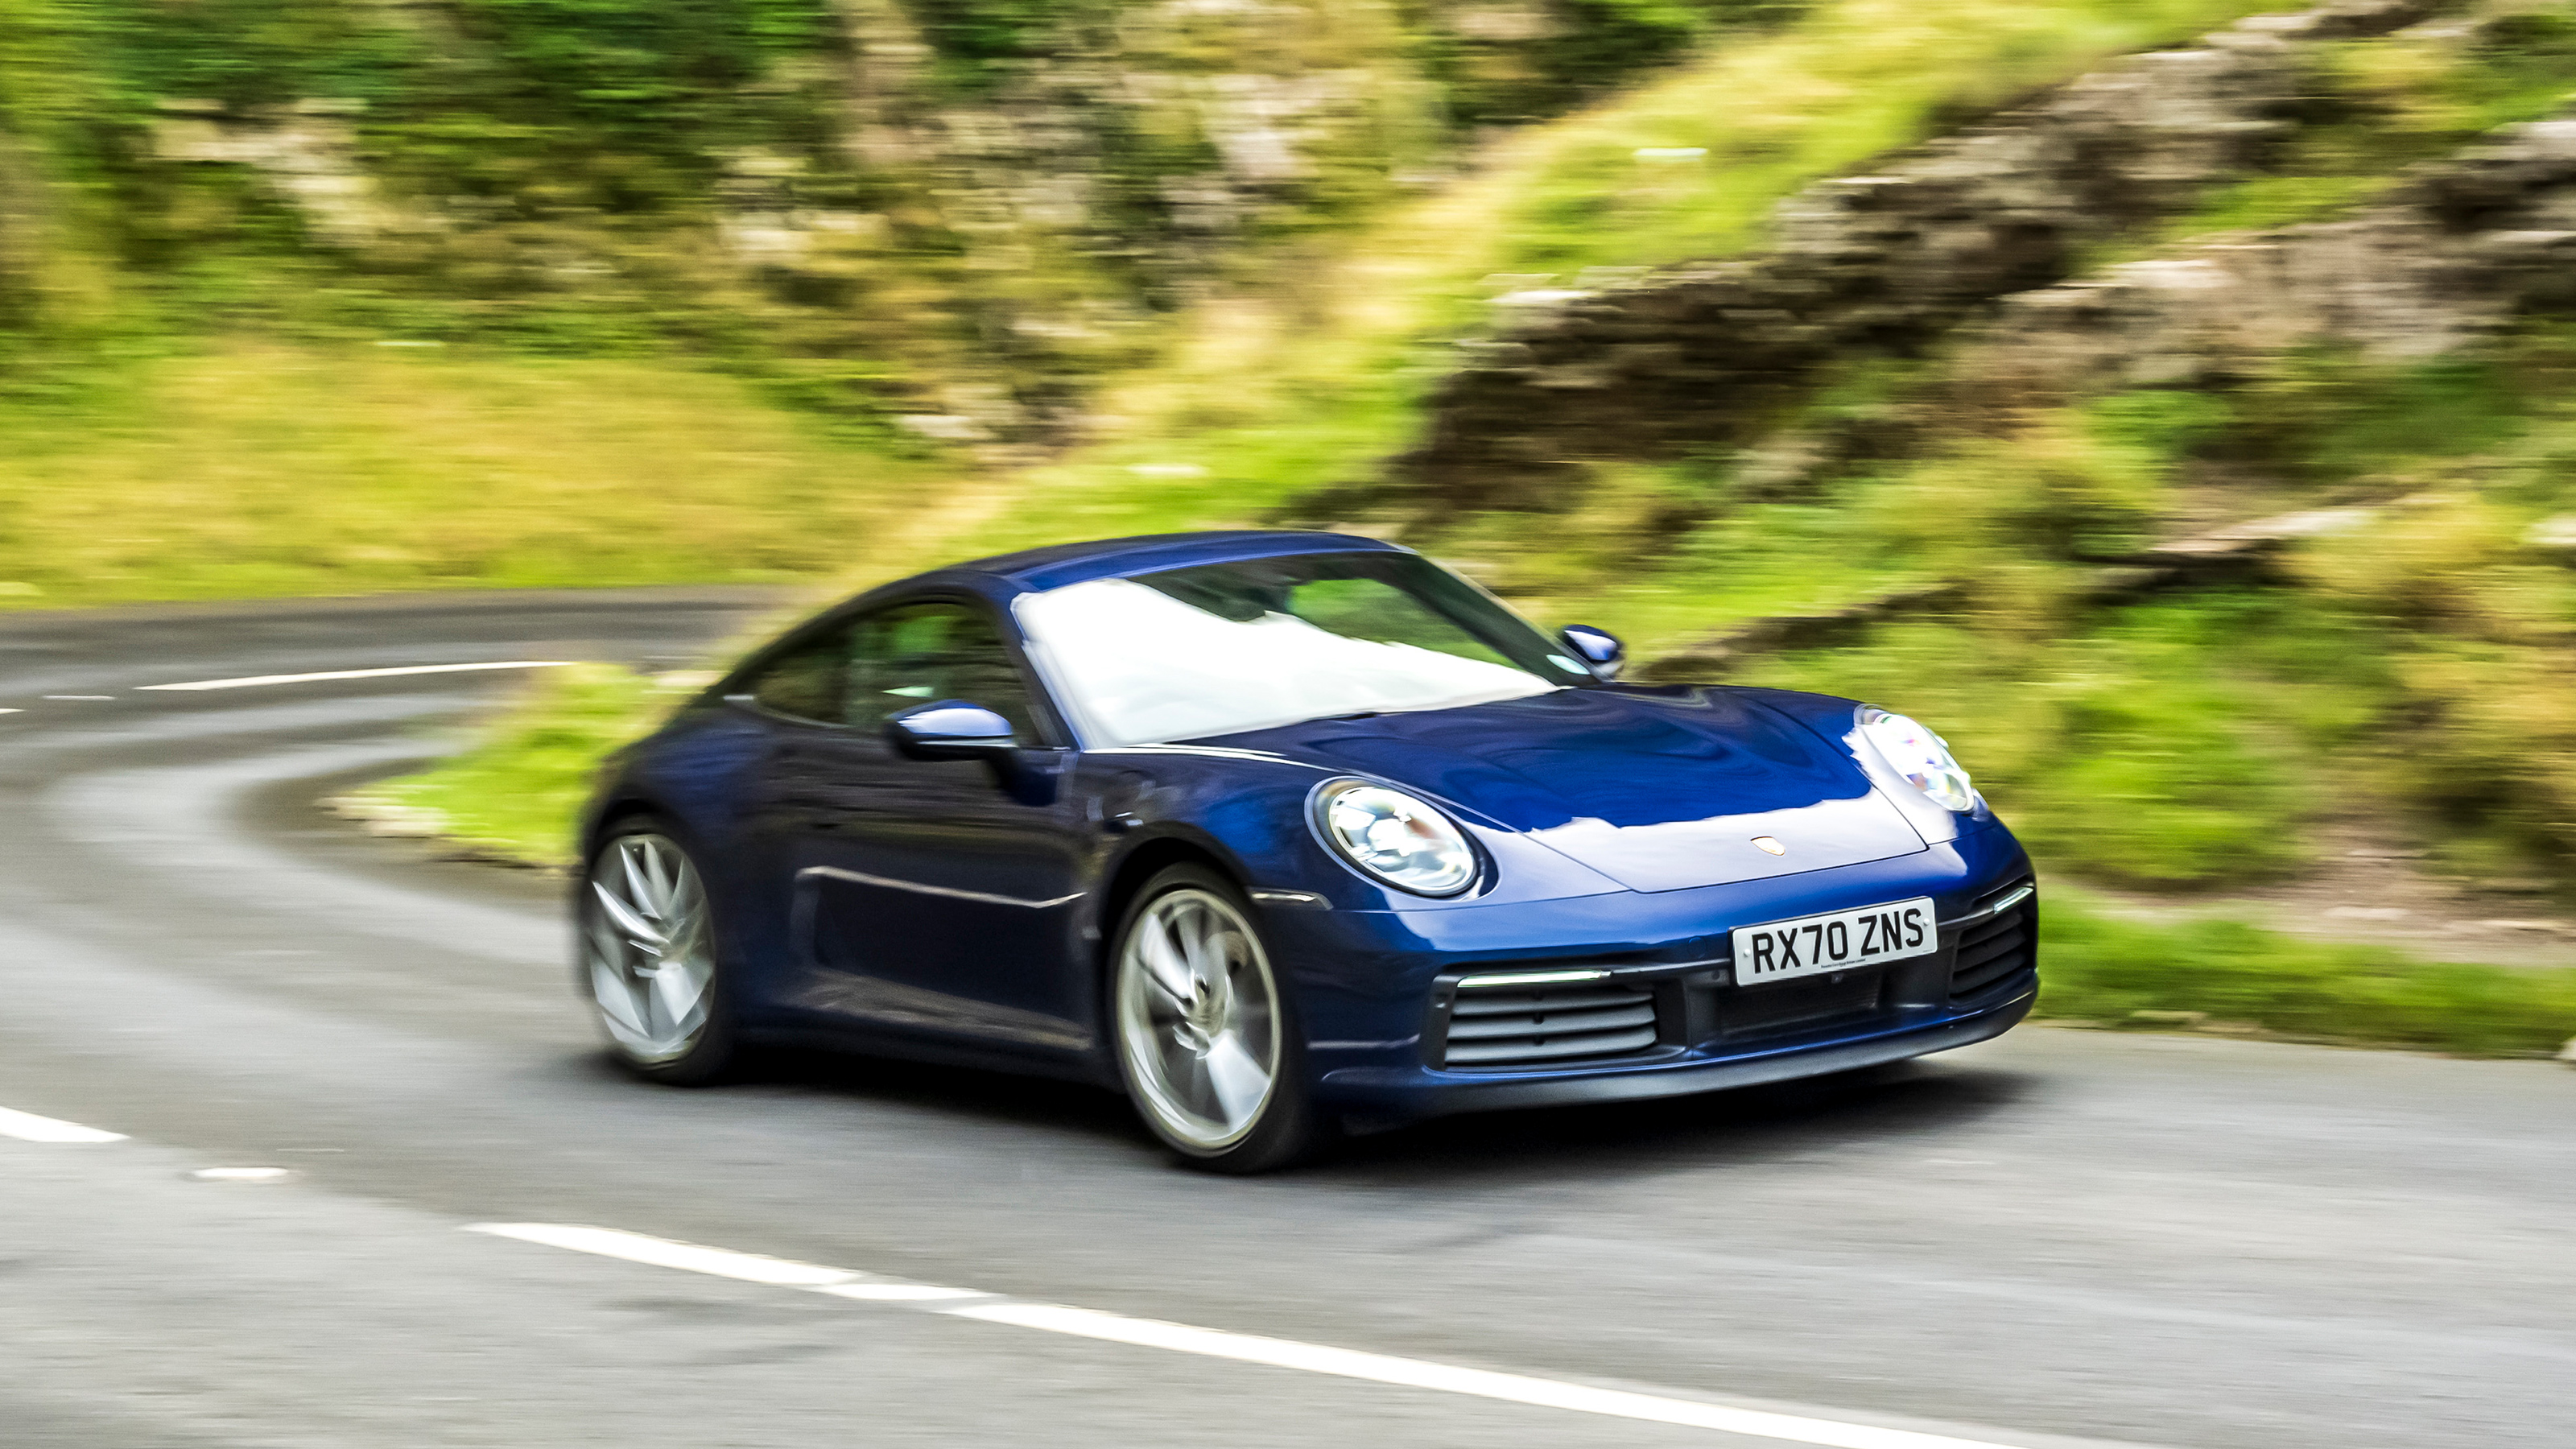 Porsche 911 review - performance and 0-60 time | evo